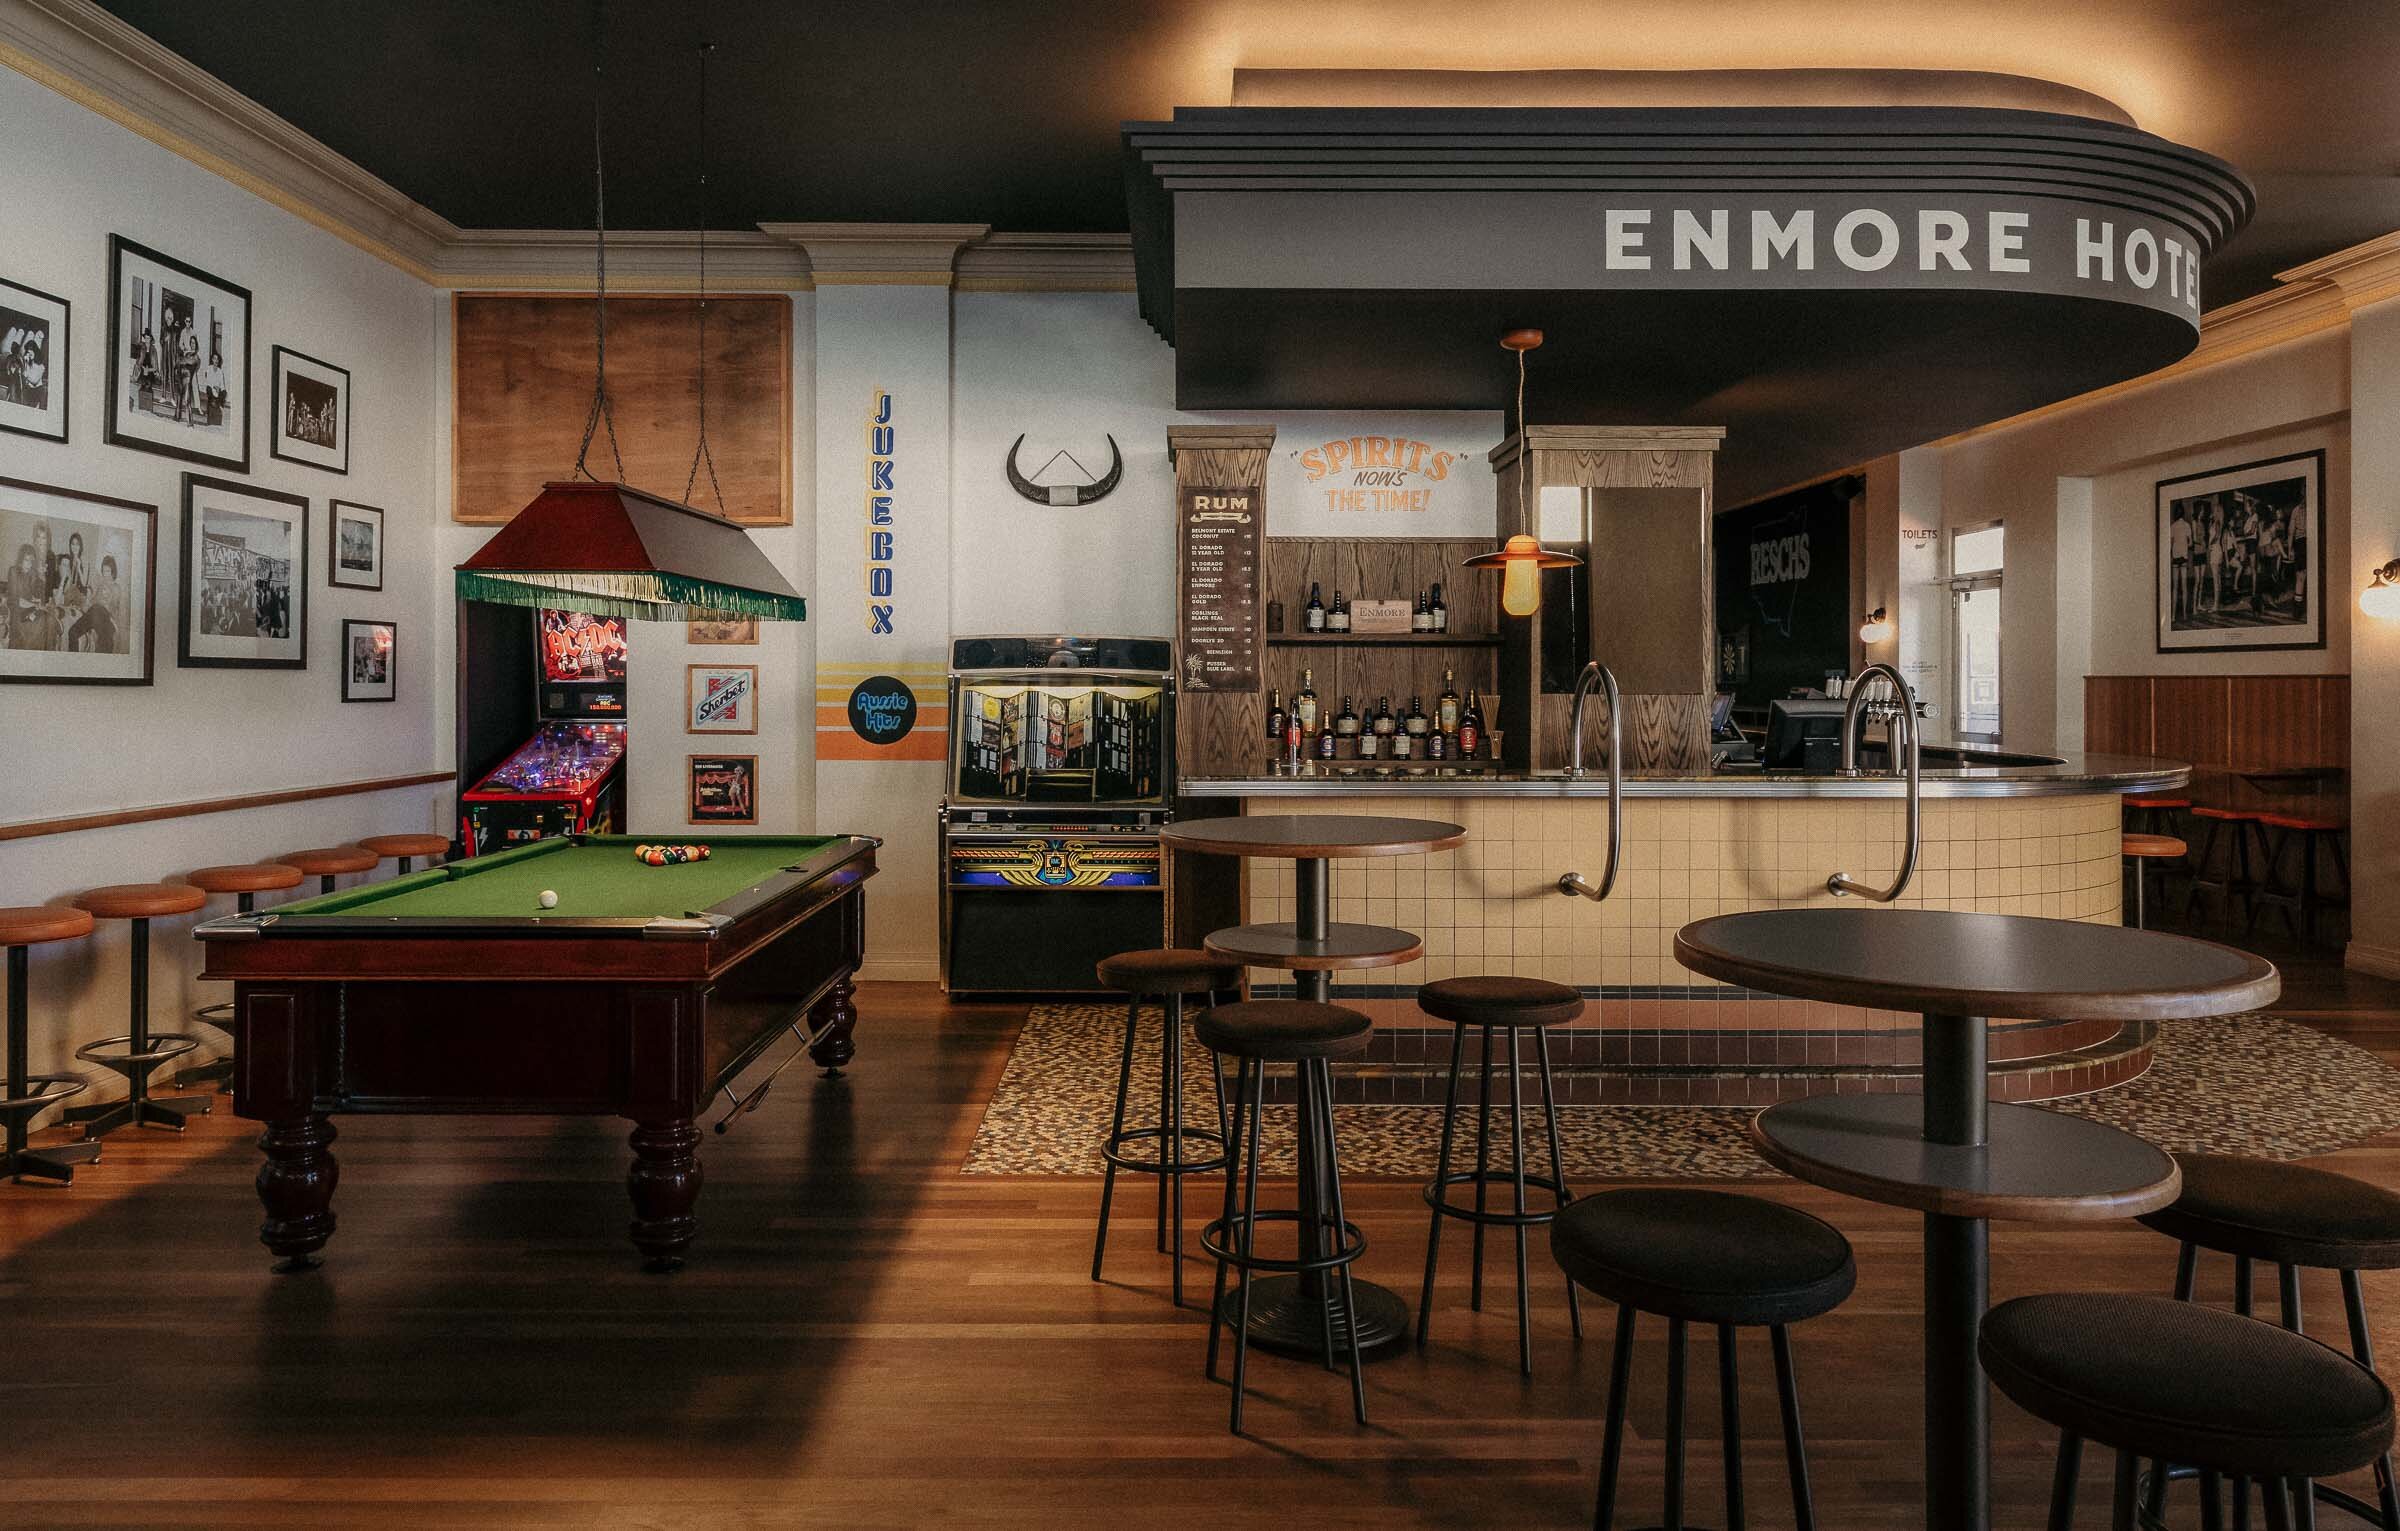 The Enmore Hotel